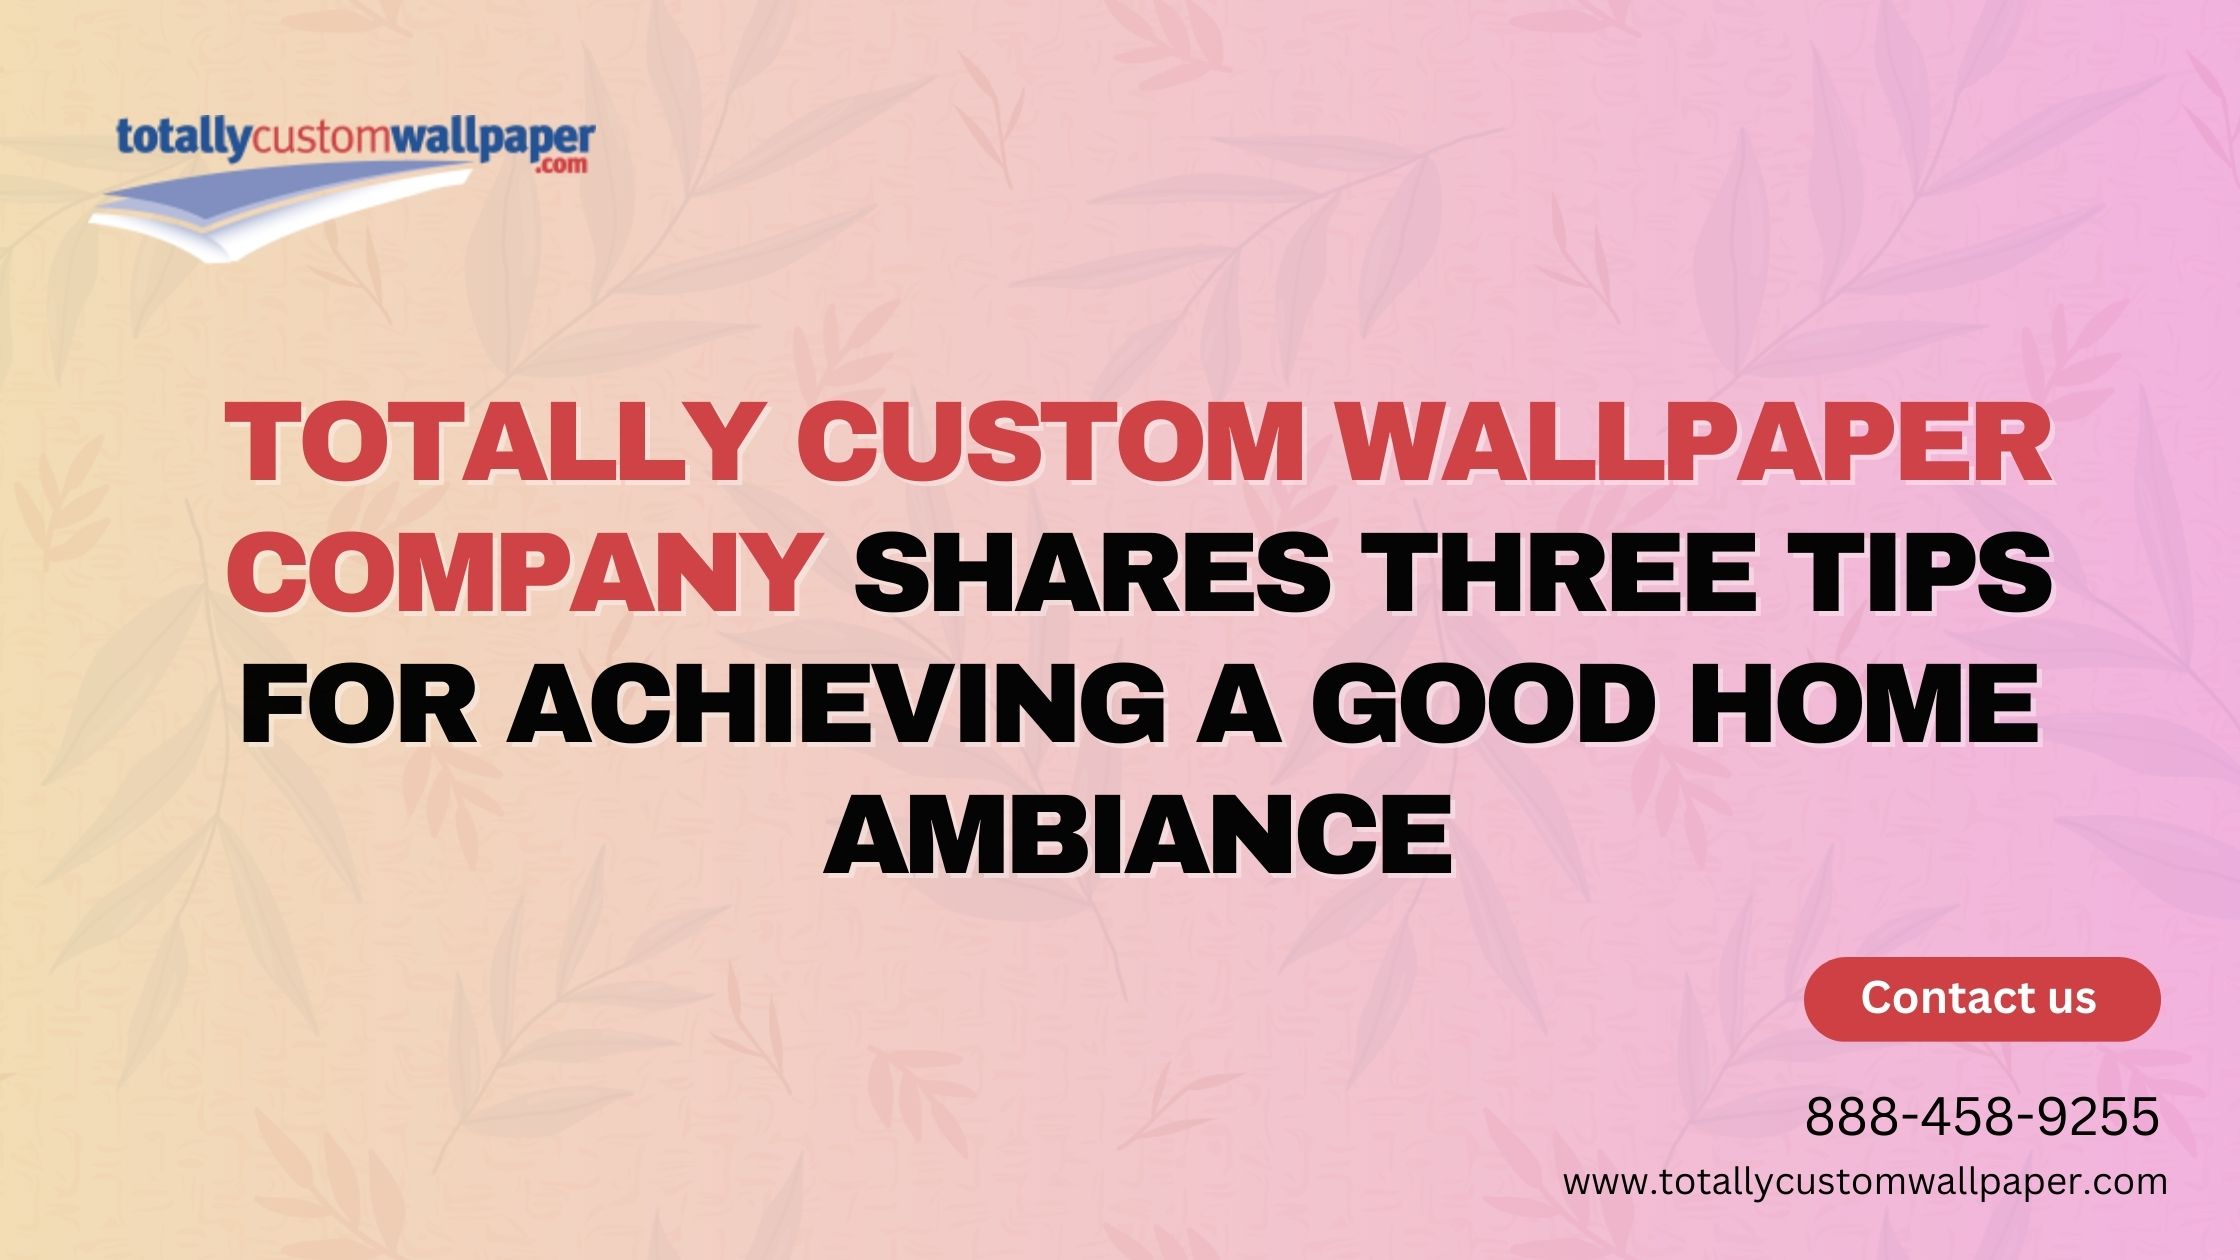 totally custom wallpaper company shares three tips for achieving a good home ambiance 1